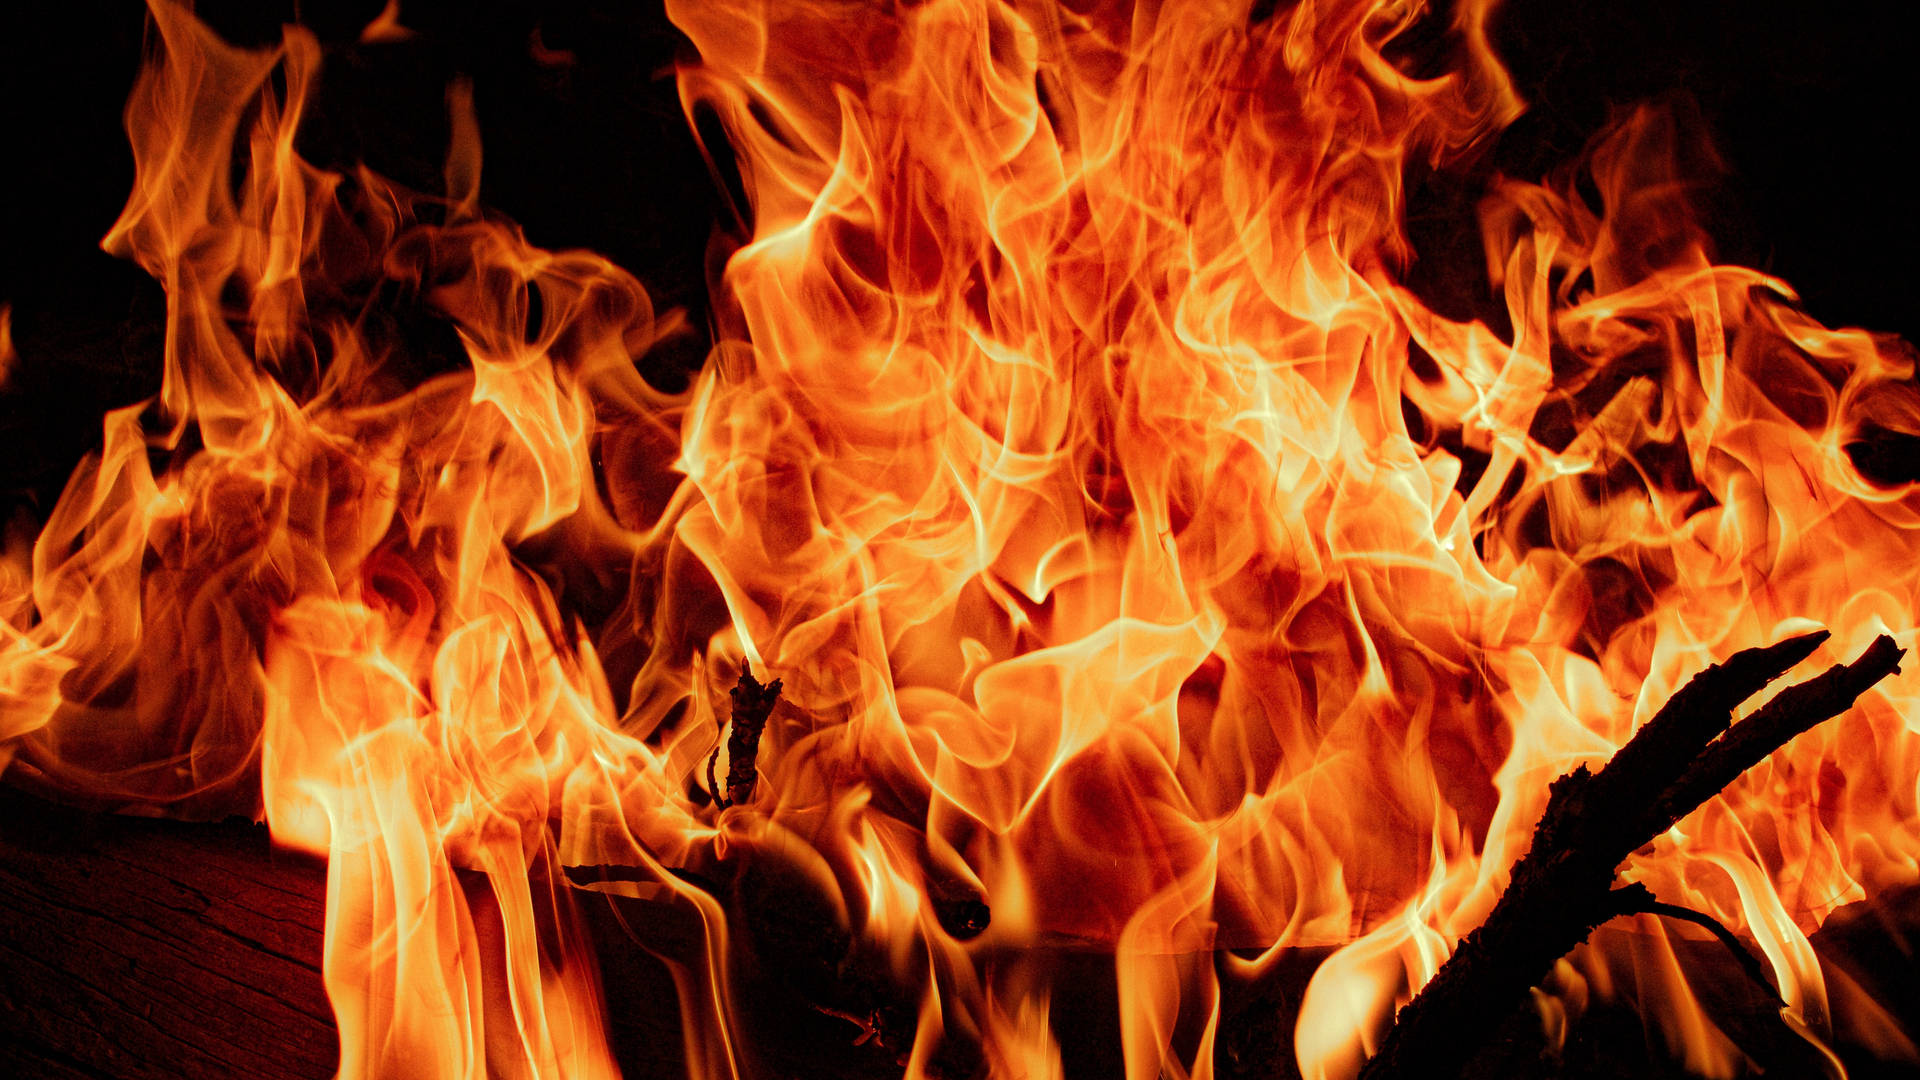 Fire 4951X2785 Wallpaper and Background Image